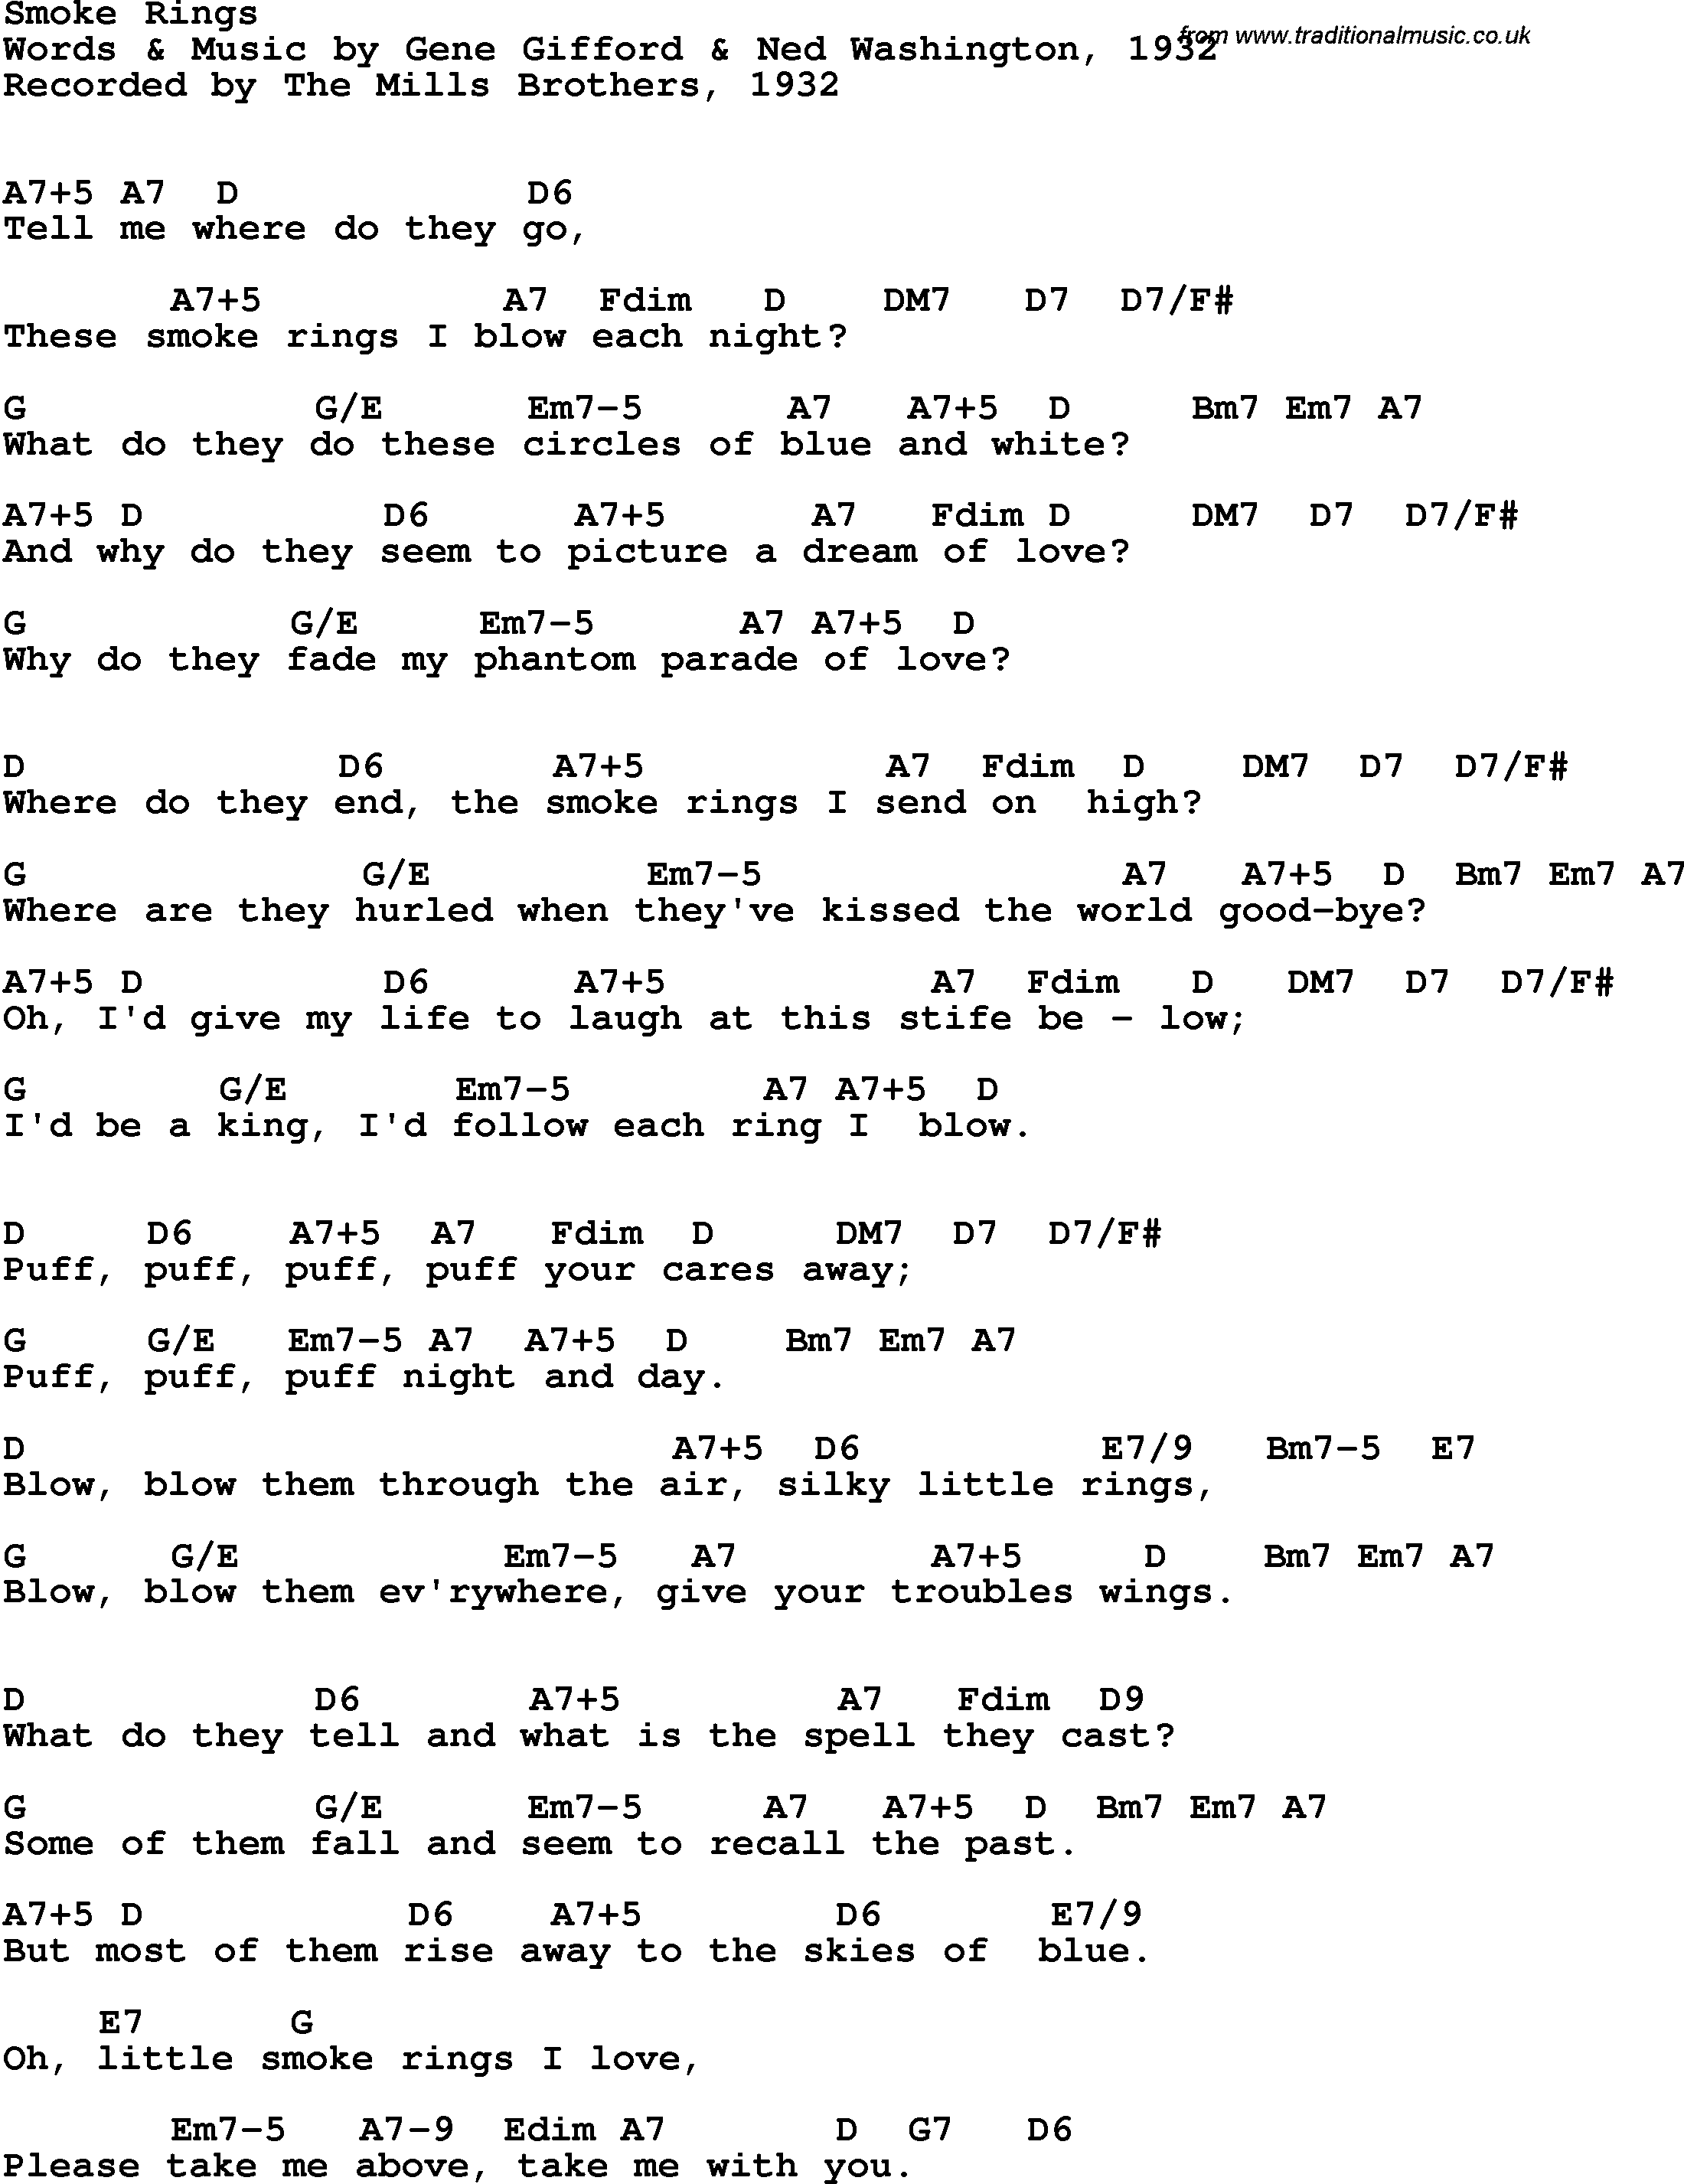 Song Lyrics with guitar chords for Smoke Rings - The Mills Brothers, 1932